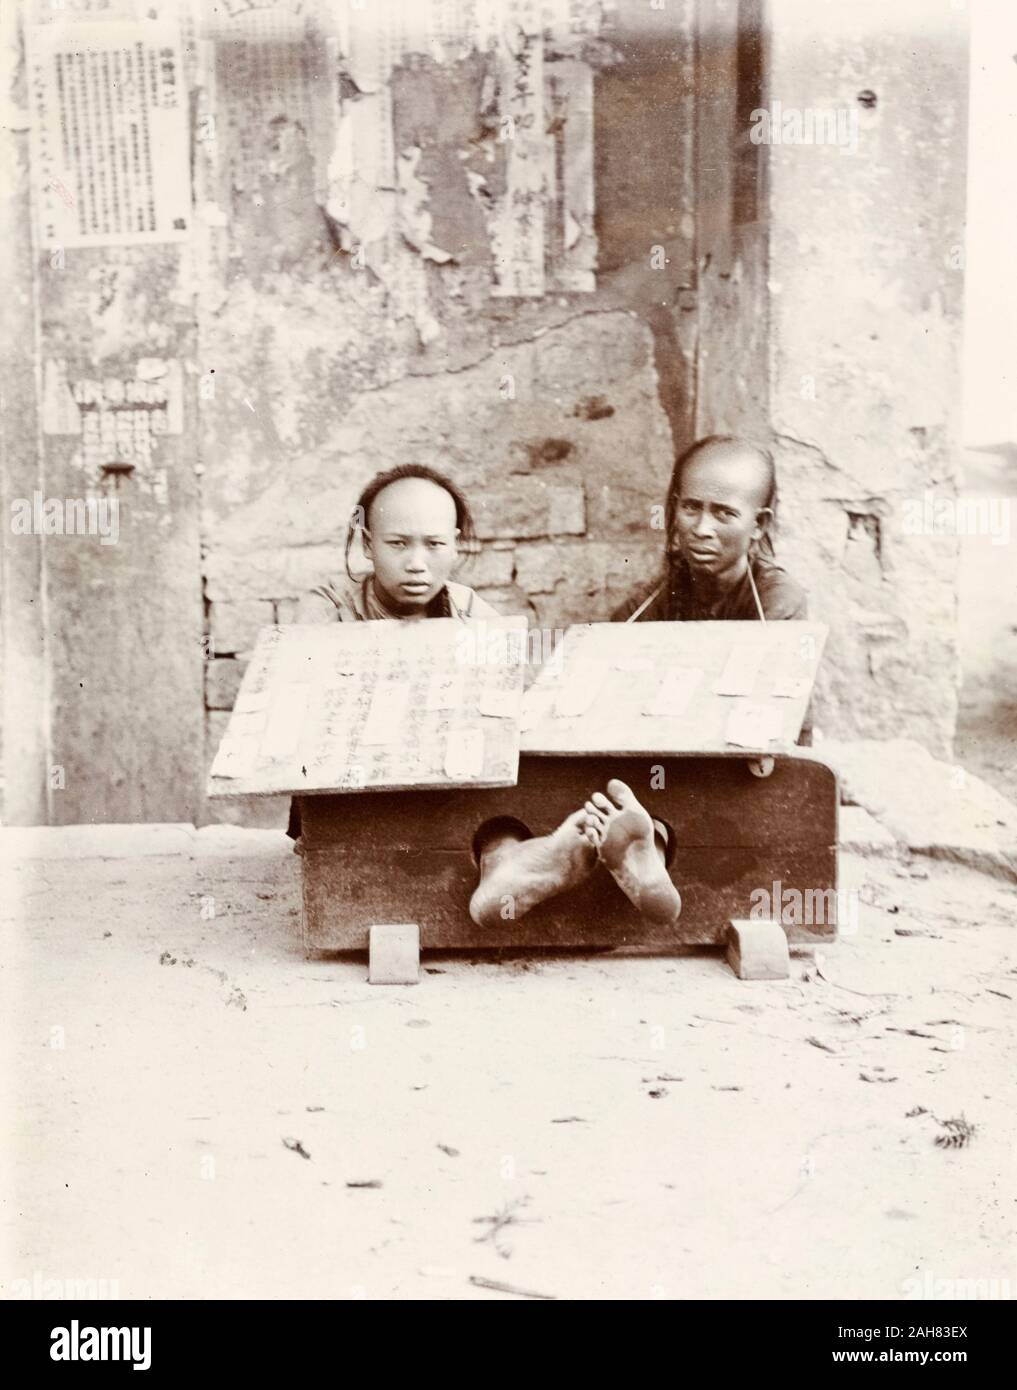 Hong KongChina, Two petty criminals sit with their ankles restrained in stocks, suffering public humiliation on a city street. Each wears a board strung around his neck, describing in detail the offense committed. Original manuscript caption: Prisoners in stocks. - generally for six hours at a stretch. Very uncomfortable if feet higher than level of ground sat upon. Their misdemeanor depicted on board, circa 1903. 1998/028/1/1/34. Stock Photo